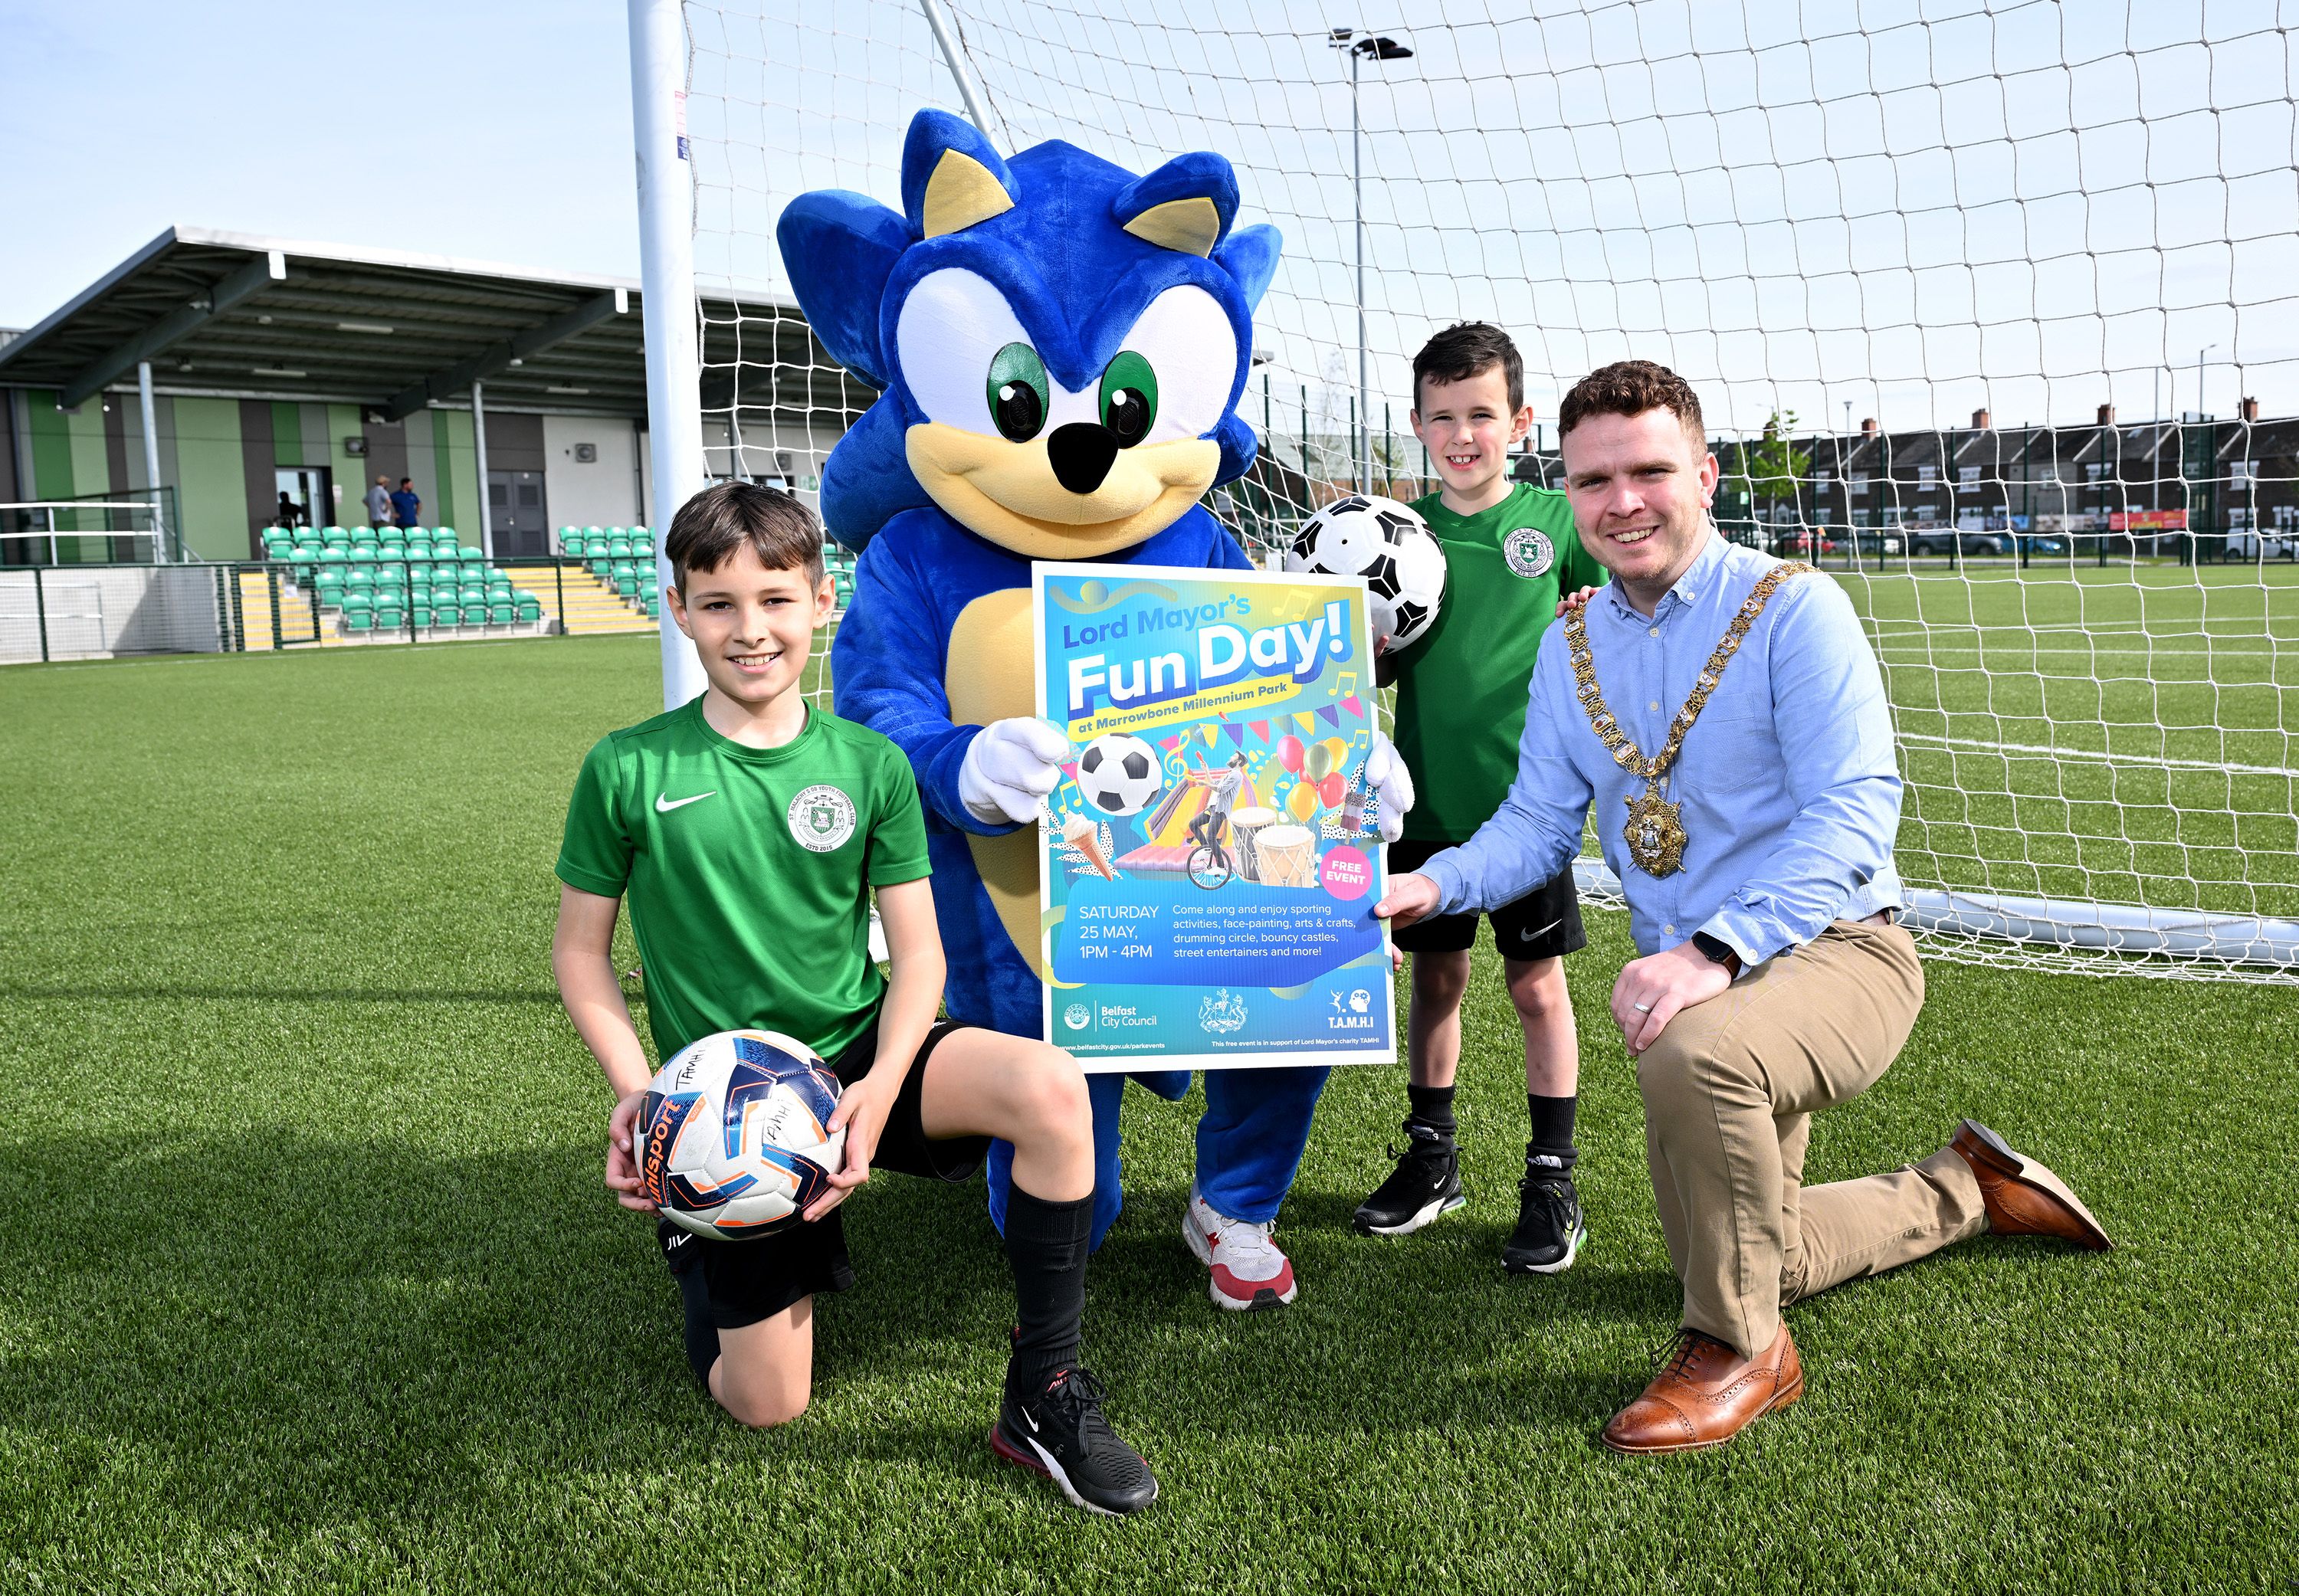 FUN DAY: Lord Mayor, Councillor Ryan Murphy joins Ruairi and Fionn Meehan and Sonic the Hedgehog ahead of a fun day and football tournament event at Marrowbone Millennium Park this Saturday